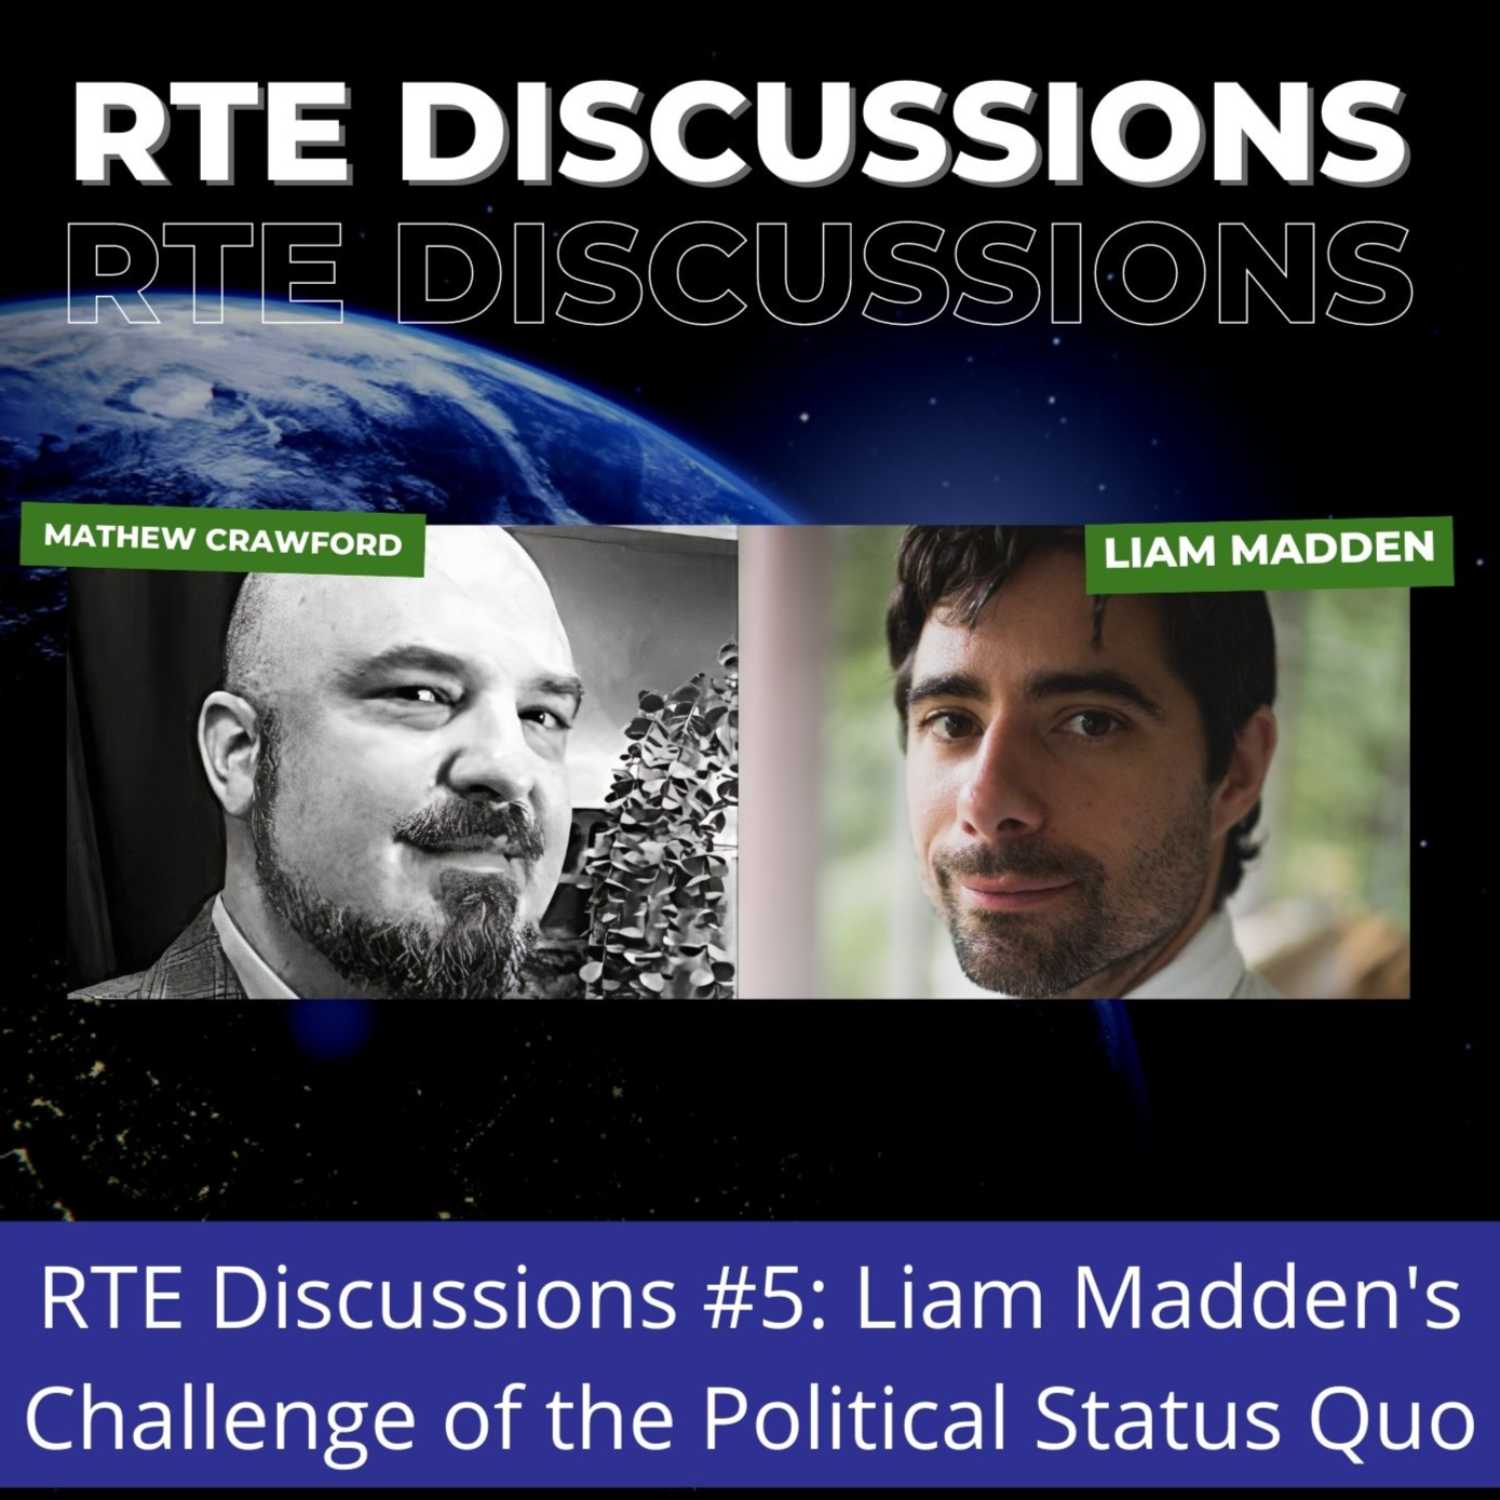 RTE Discussions #5: Liam Madden's Challenge of the Political Status Quo